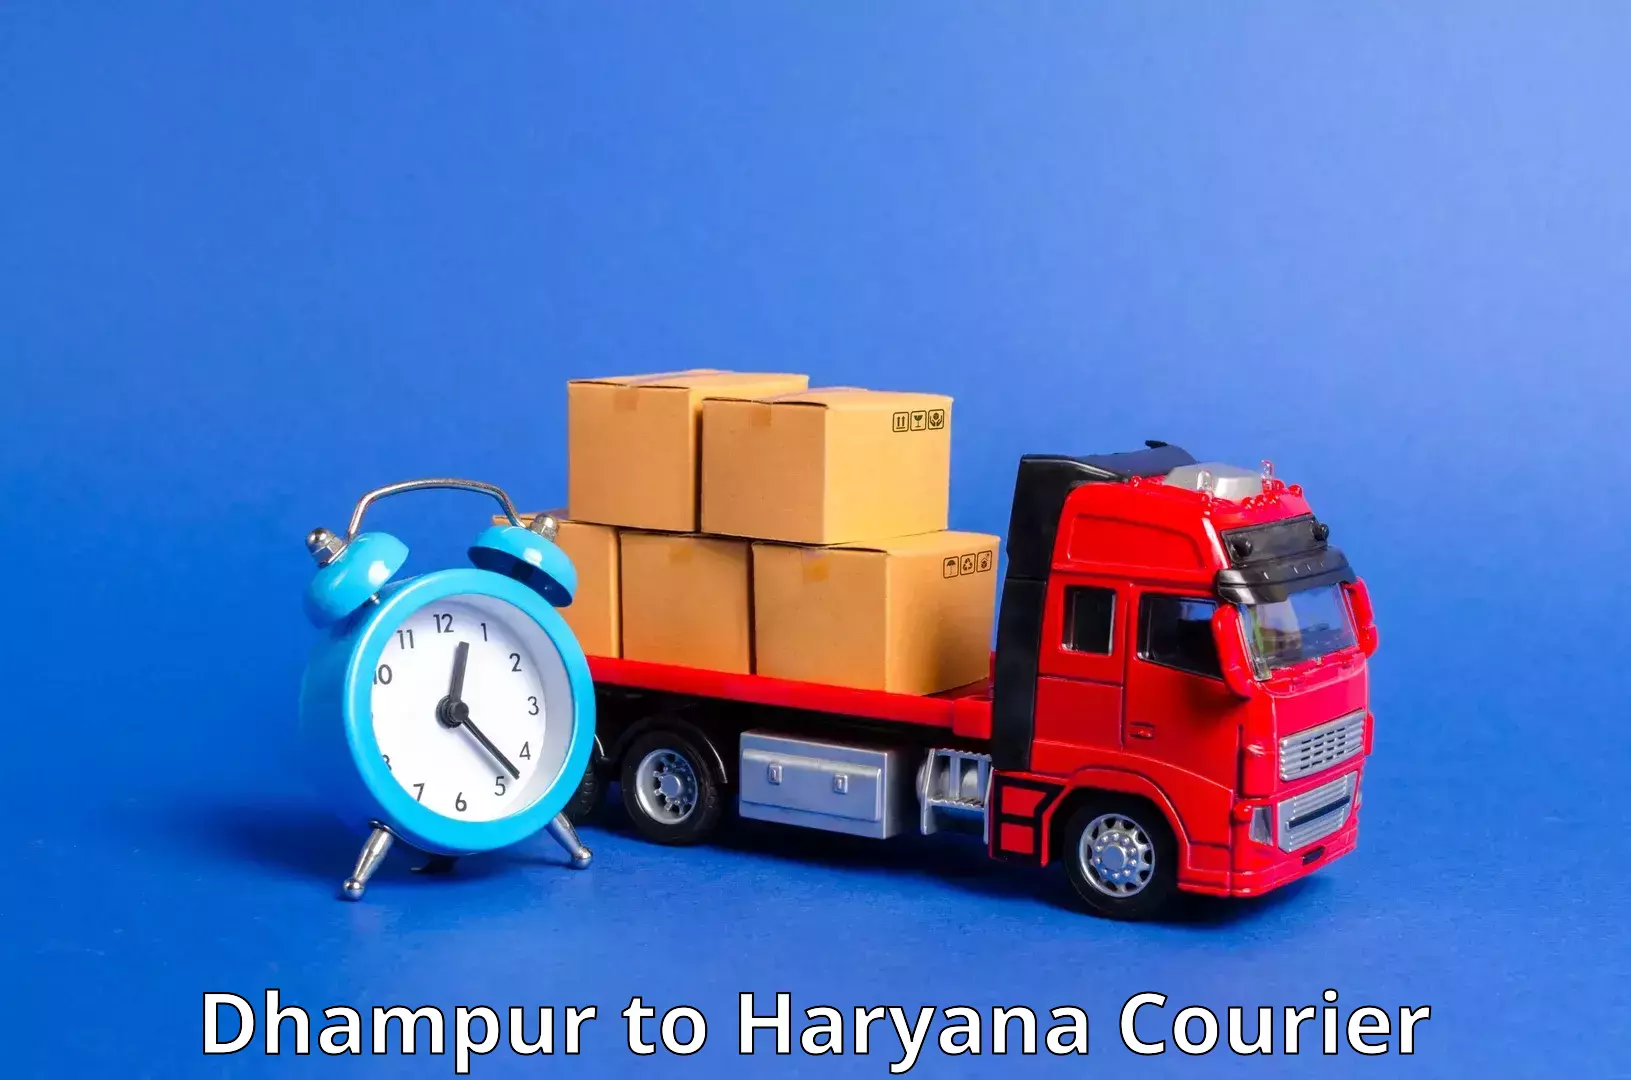 Express logistics service Dhampur to Sonipat